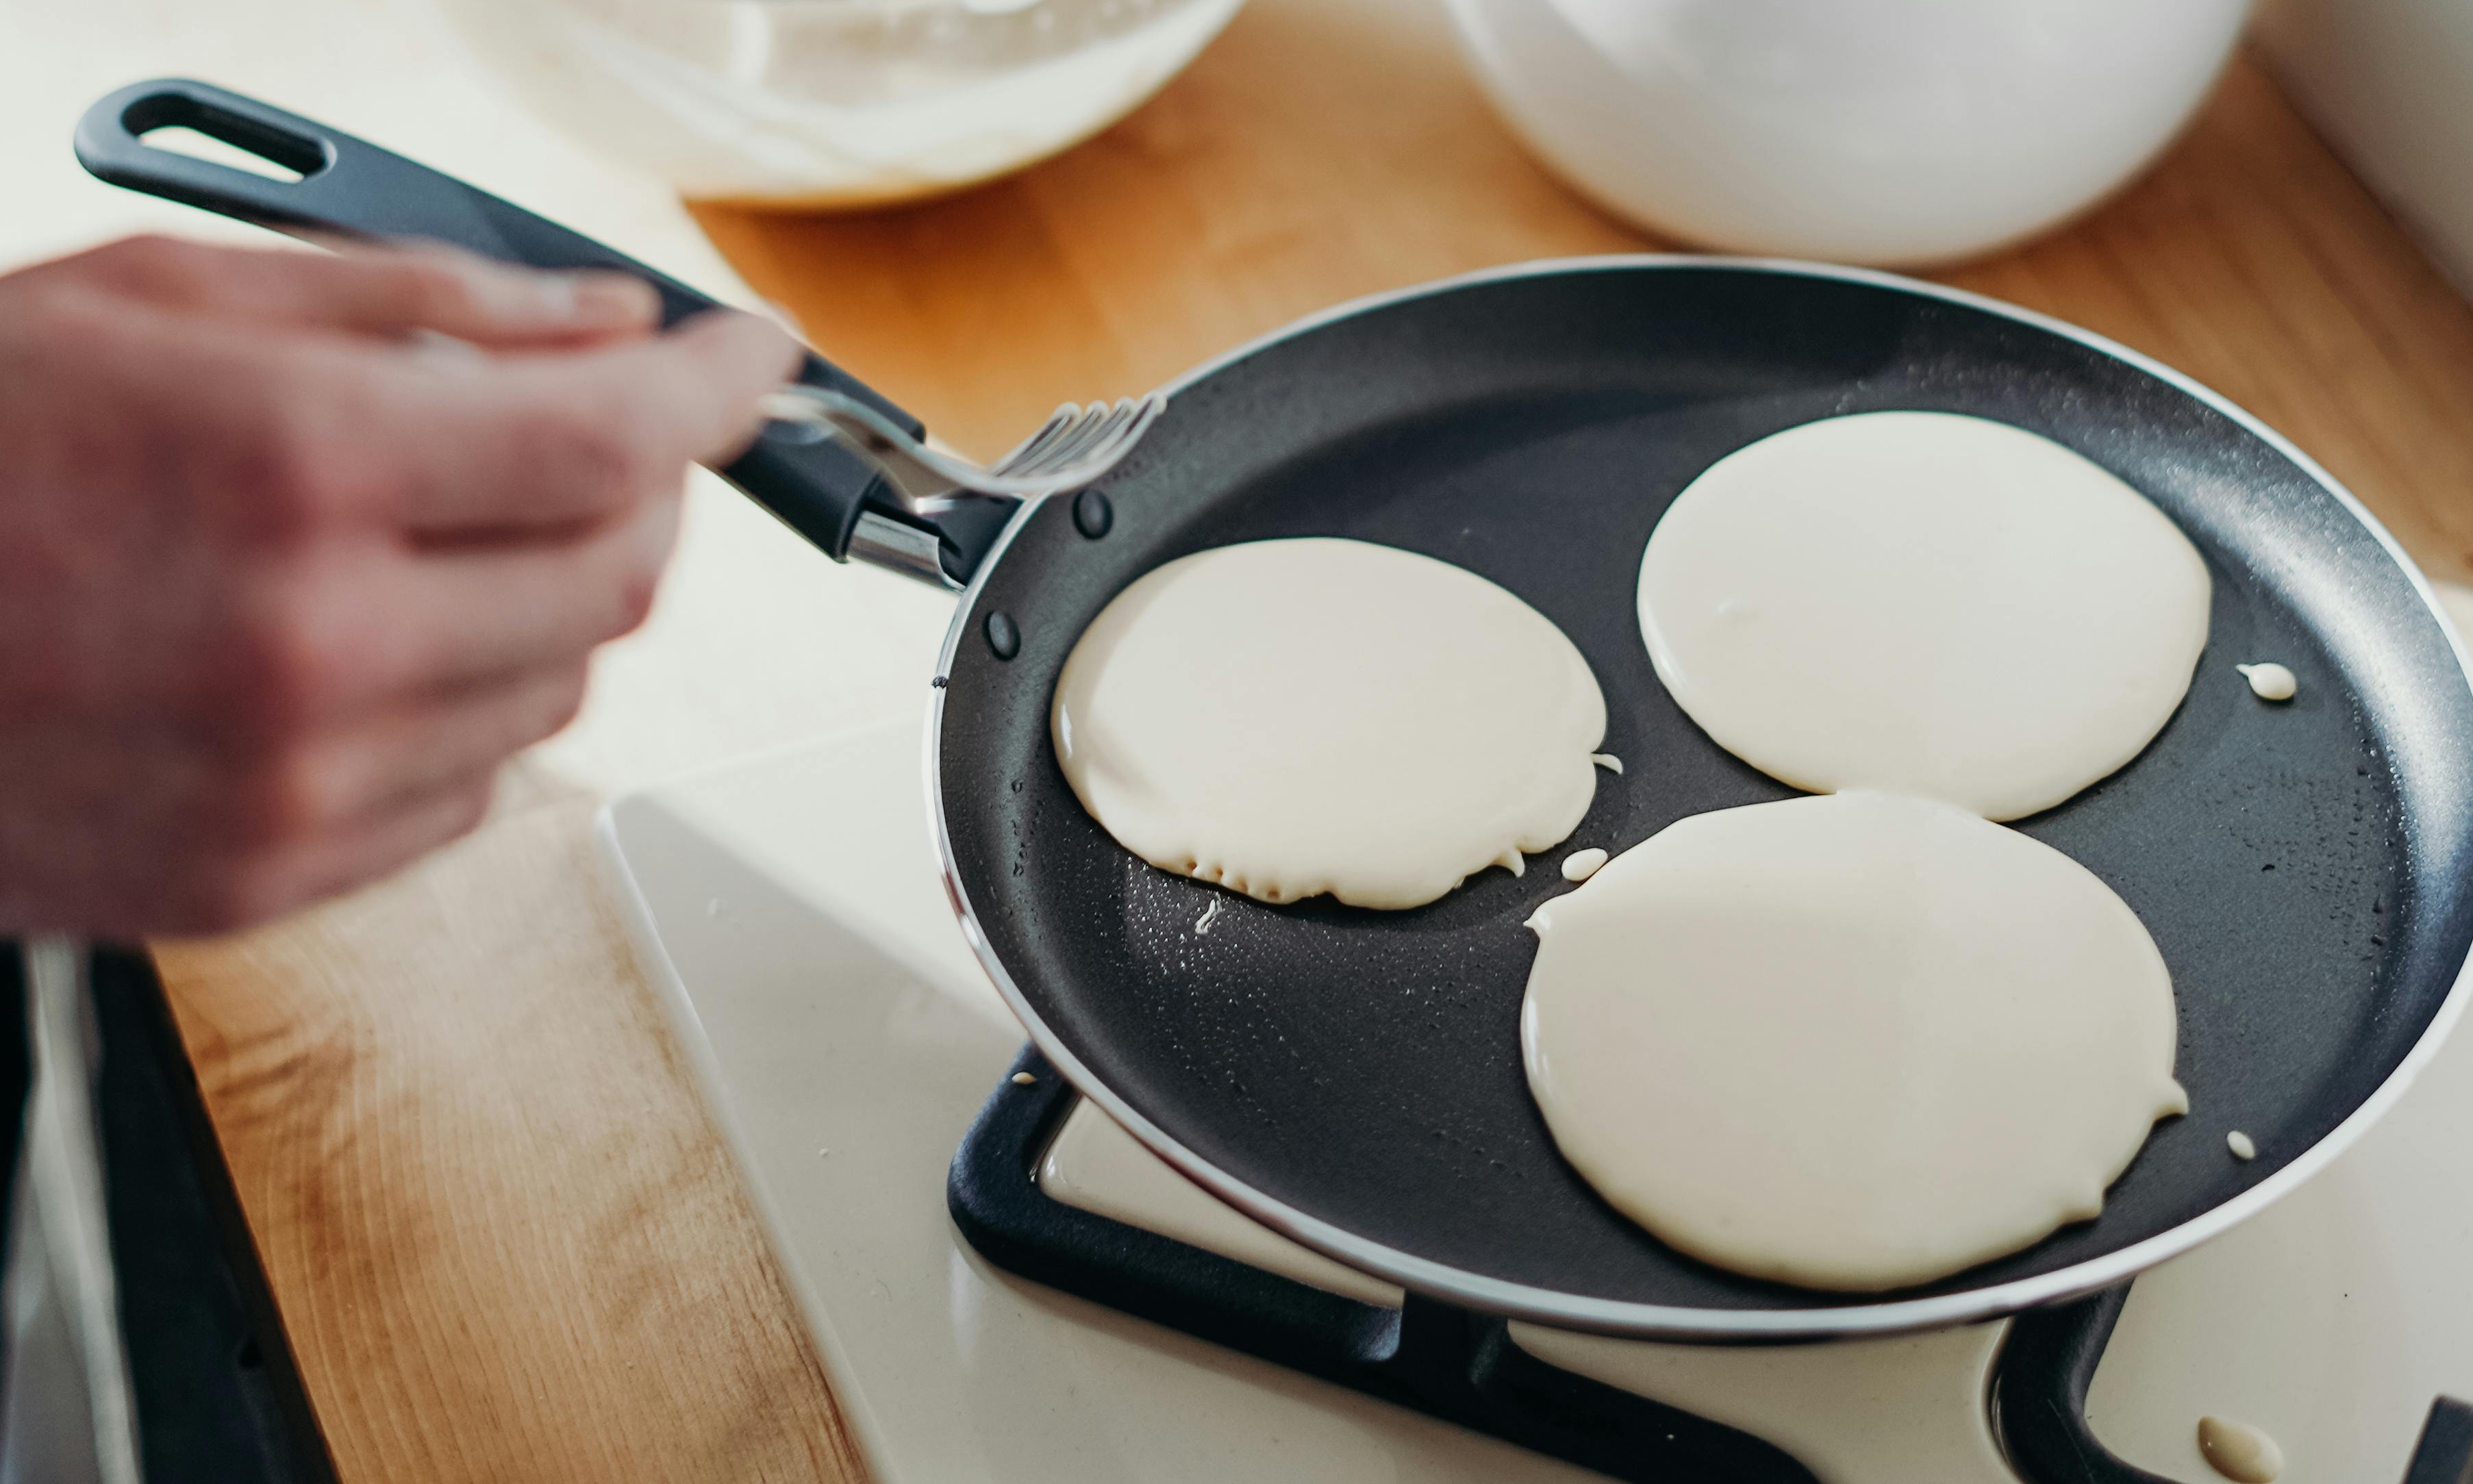 Natalie is preparing pancakes, when Robert comes in with some news | Source: Pexels